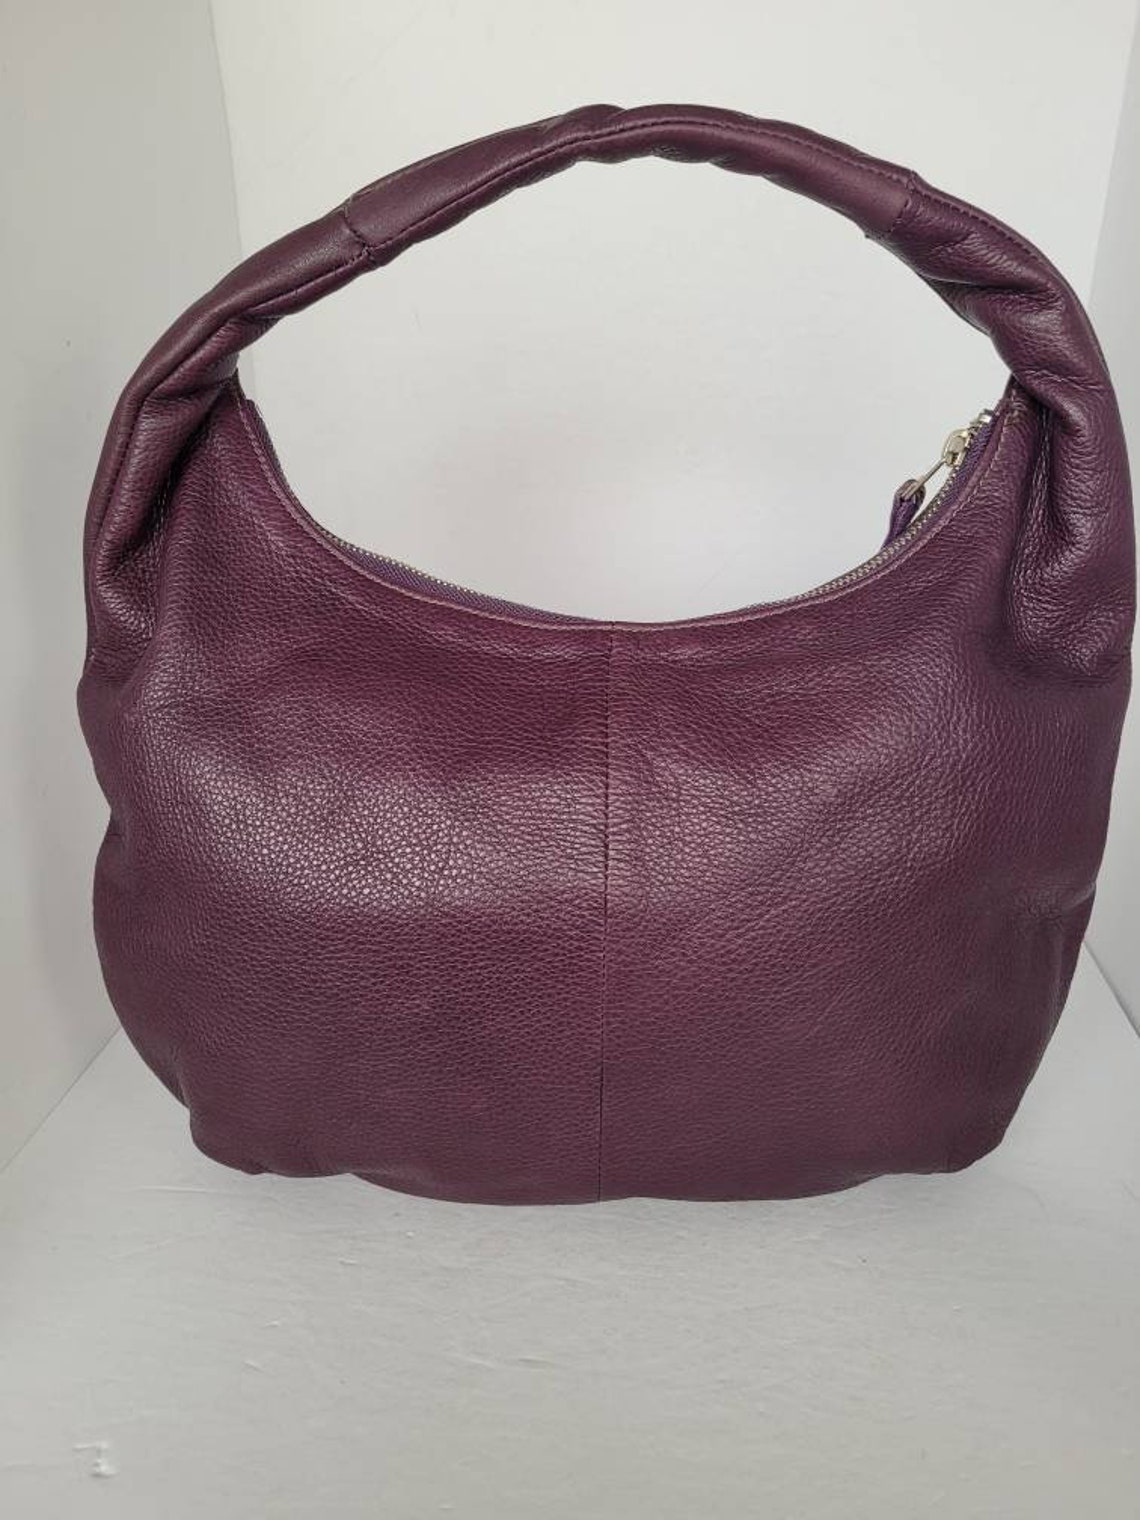 1990s Roots Canada Leather Hobo Bag | Etsy